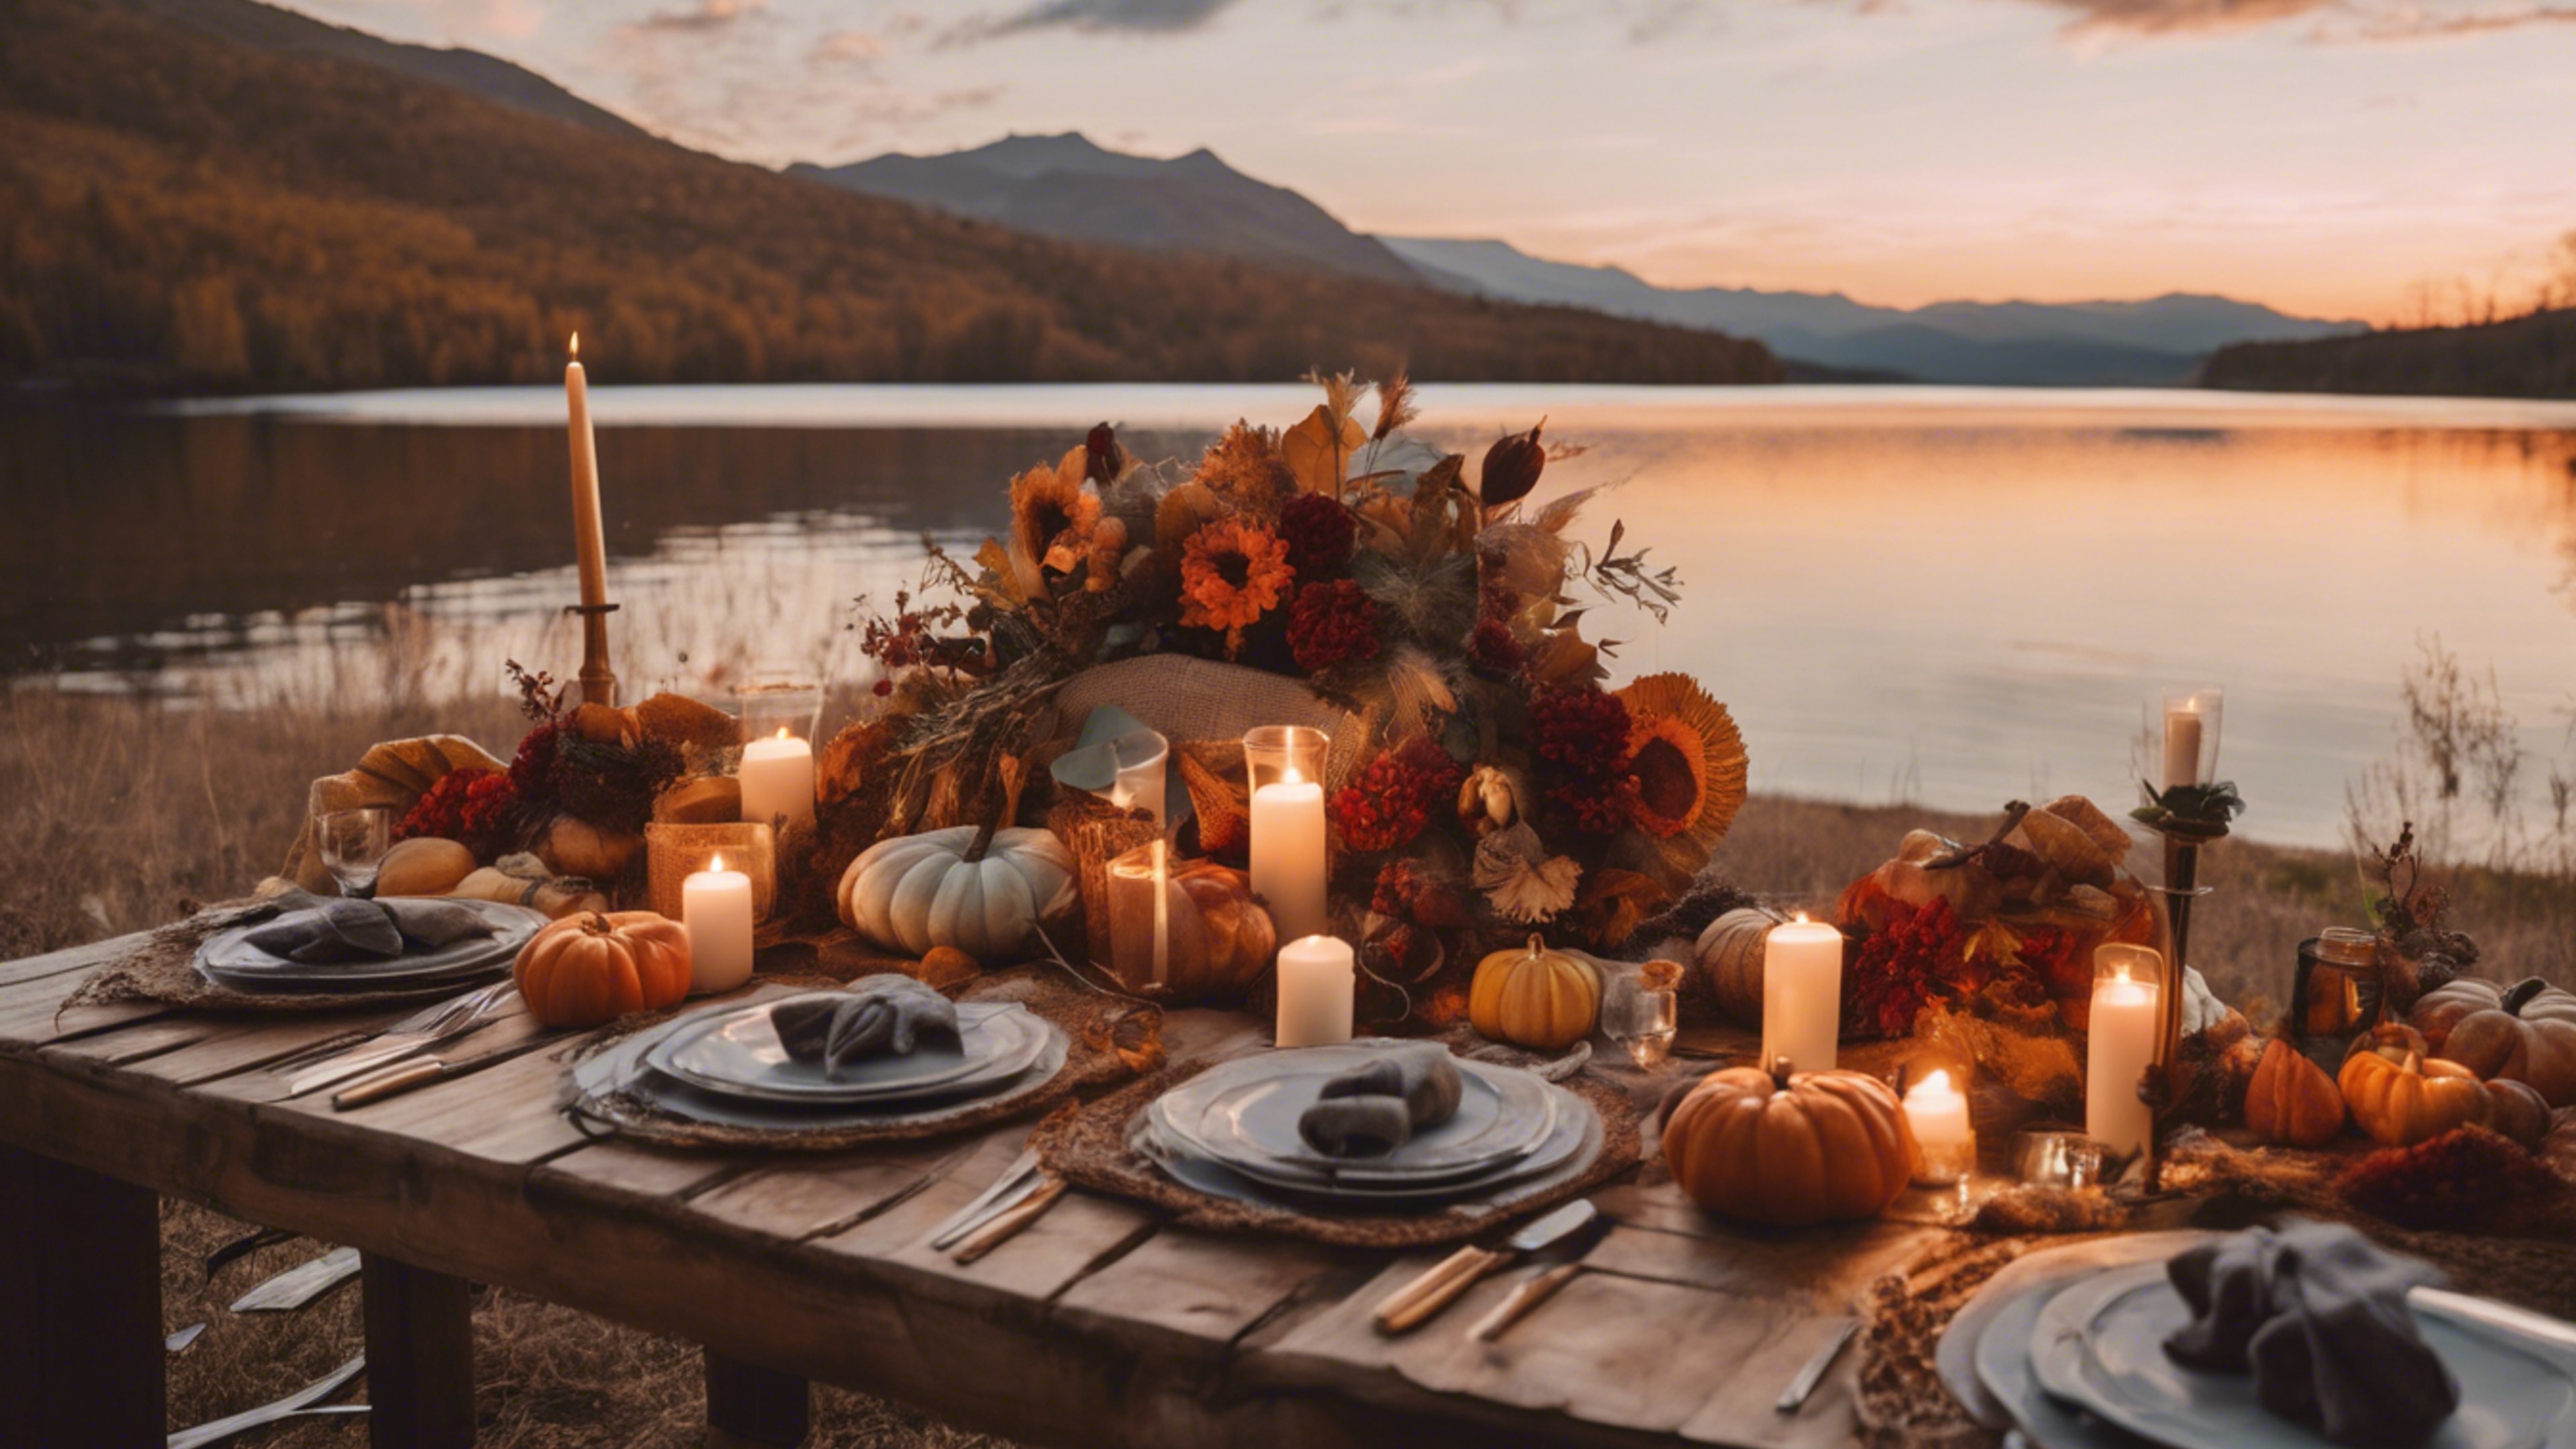 An outdoor Thanksgiving setup with boho decorations next to a breathtaking mountain lake during sunset. Wallpaper[488ff8a1b73146e3b682]